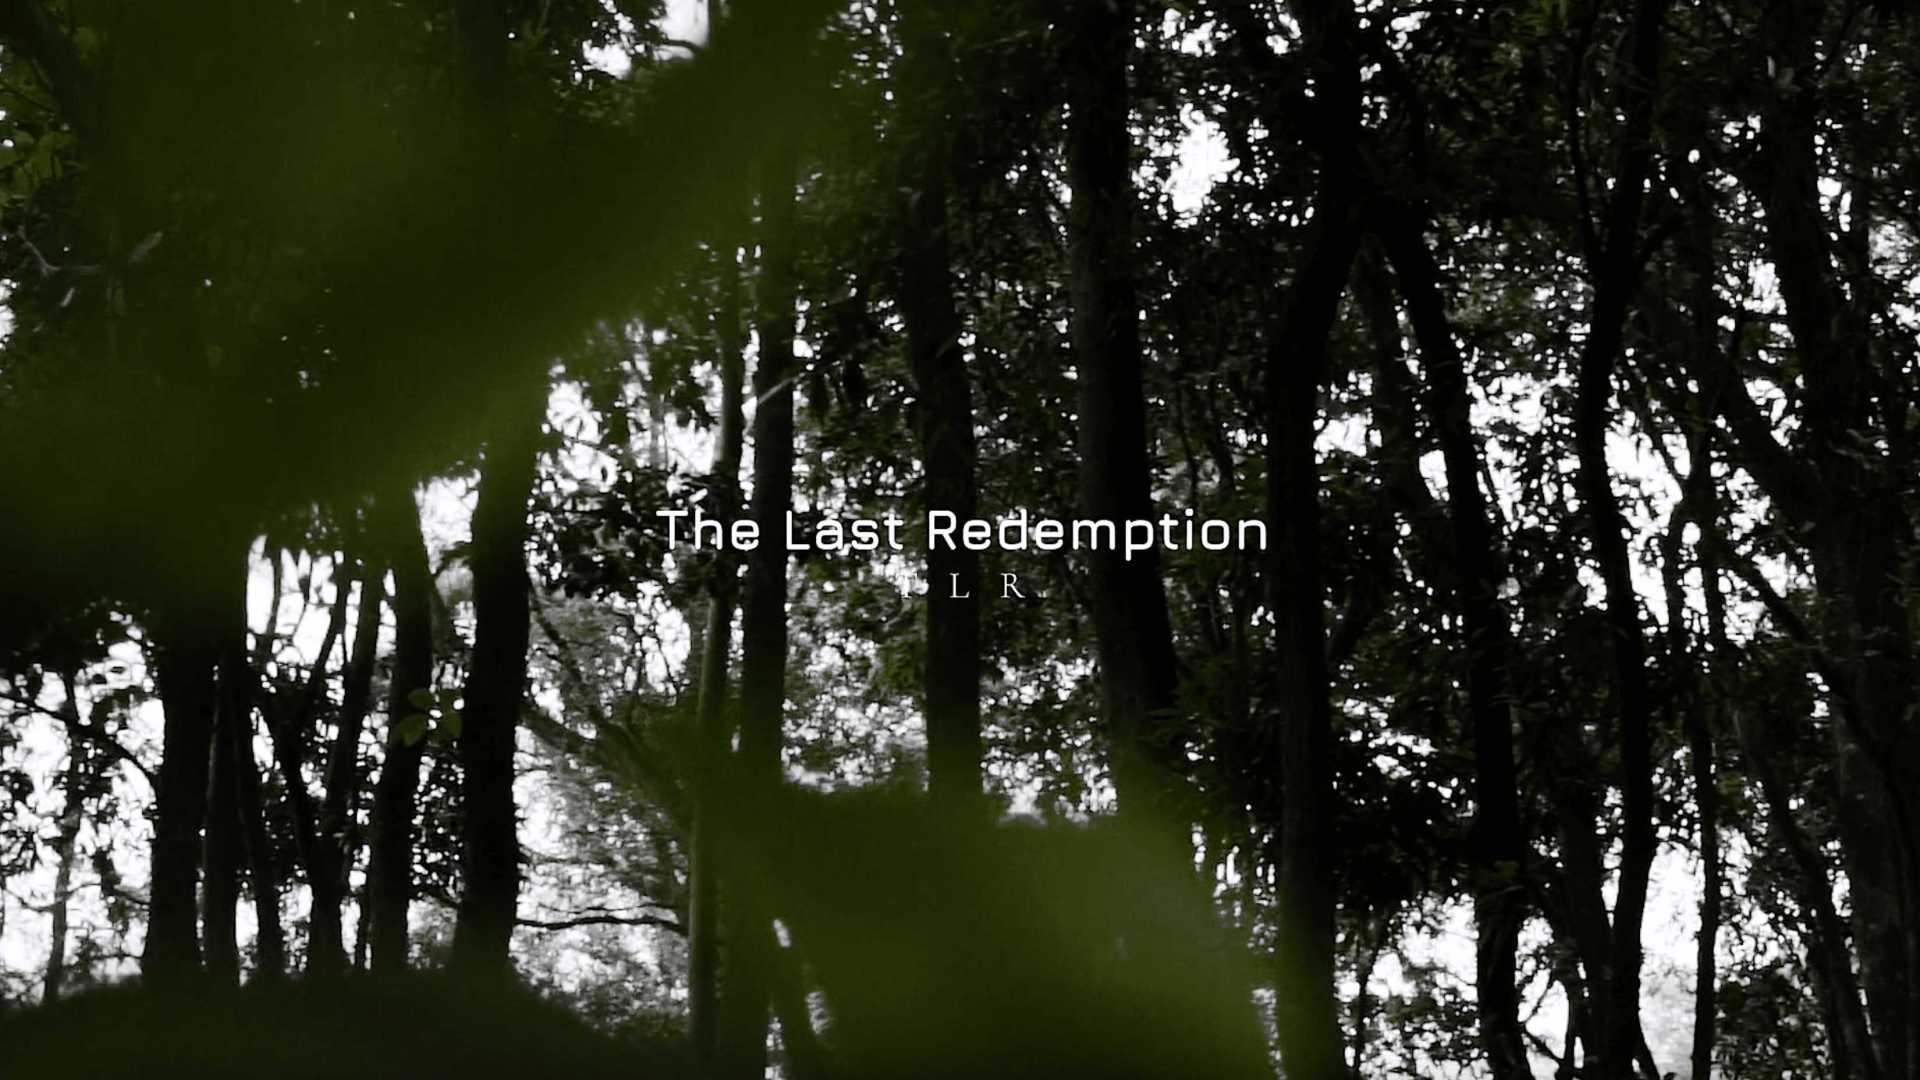 THE LAST REDEMPTION